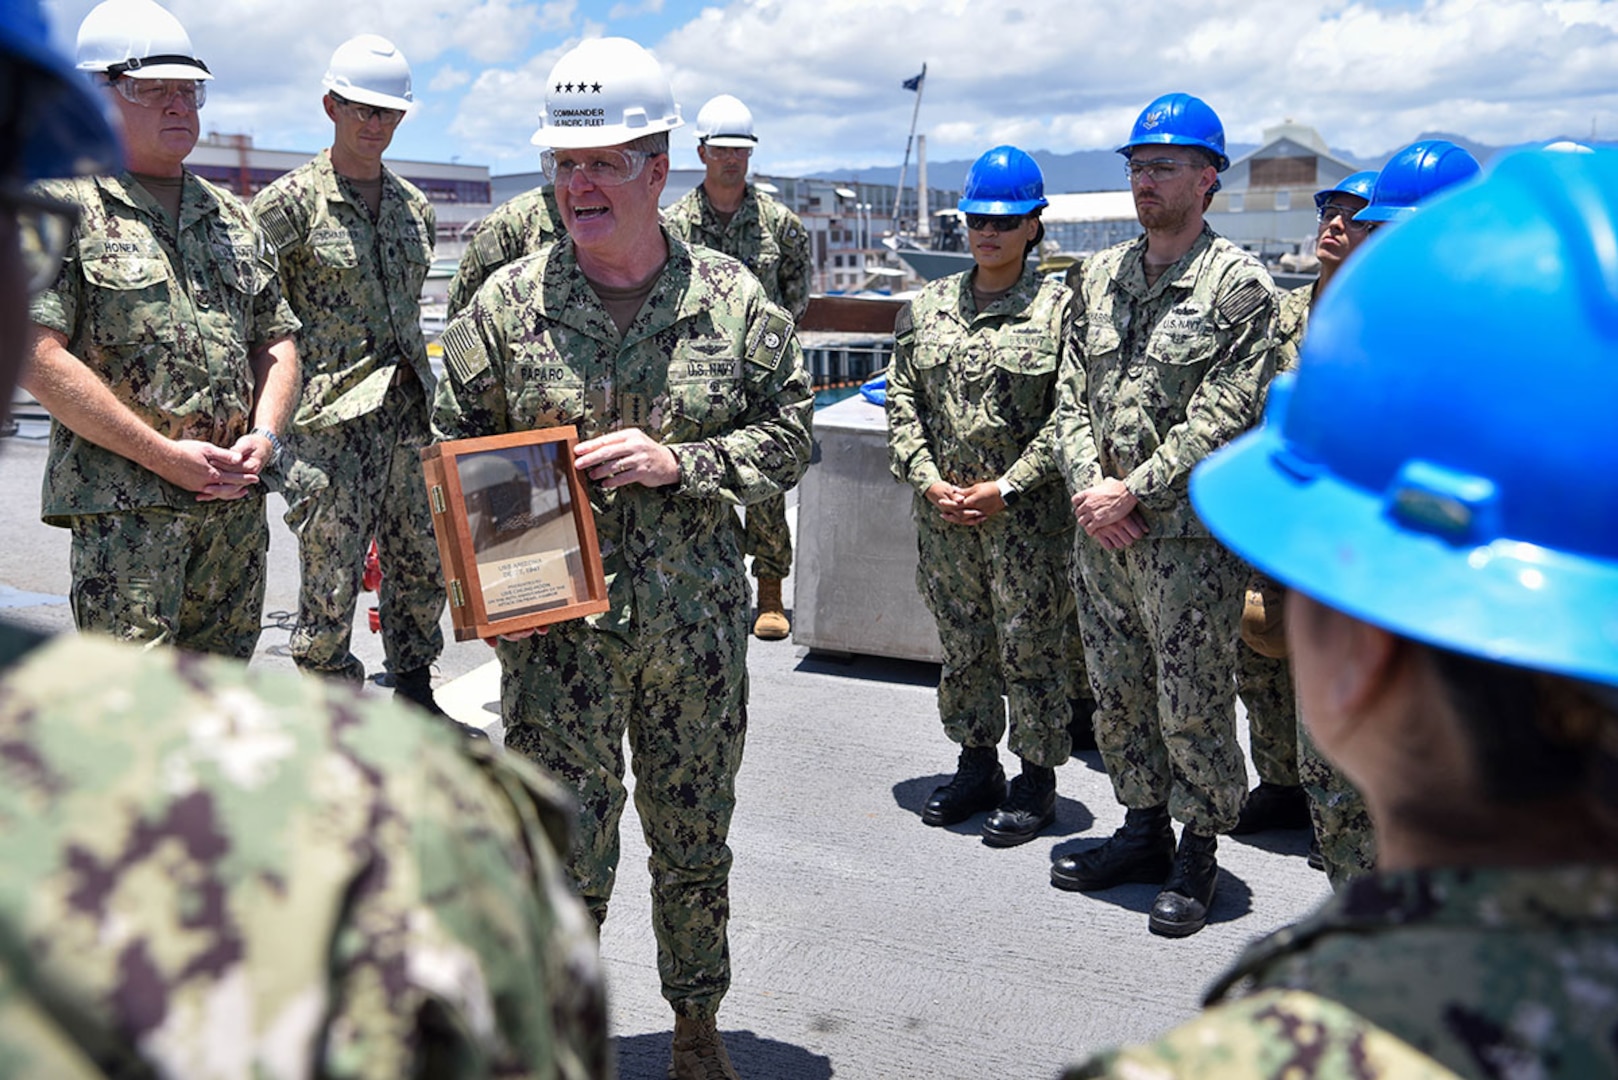 Adm. Samuel Paparo, commander of U.S. Pacific Fleet, presents a relic from the USS Arizona (BB-39) to the crew of the Arleigh Burke-class destroyer USS Chung-Hoon (DDG 93) in remembrance and commemoration of the 80th anniversary of the attack on Pearl Harbor. The relic originates from a section of the superstructure of the Arizona that was removed from the ship when the Arizona Memorial was constructed. The Naval History and Heritage Command authorized the removal of sections of the relics for display and legacy enhancing purposes in 1994.